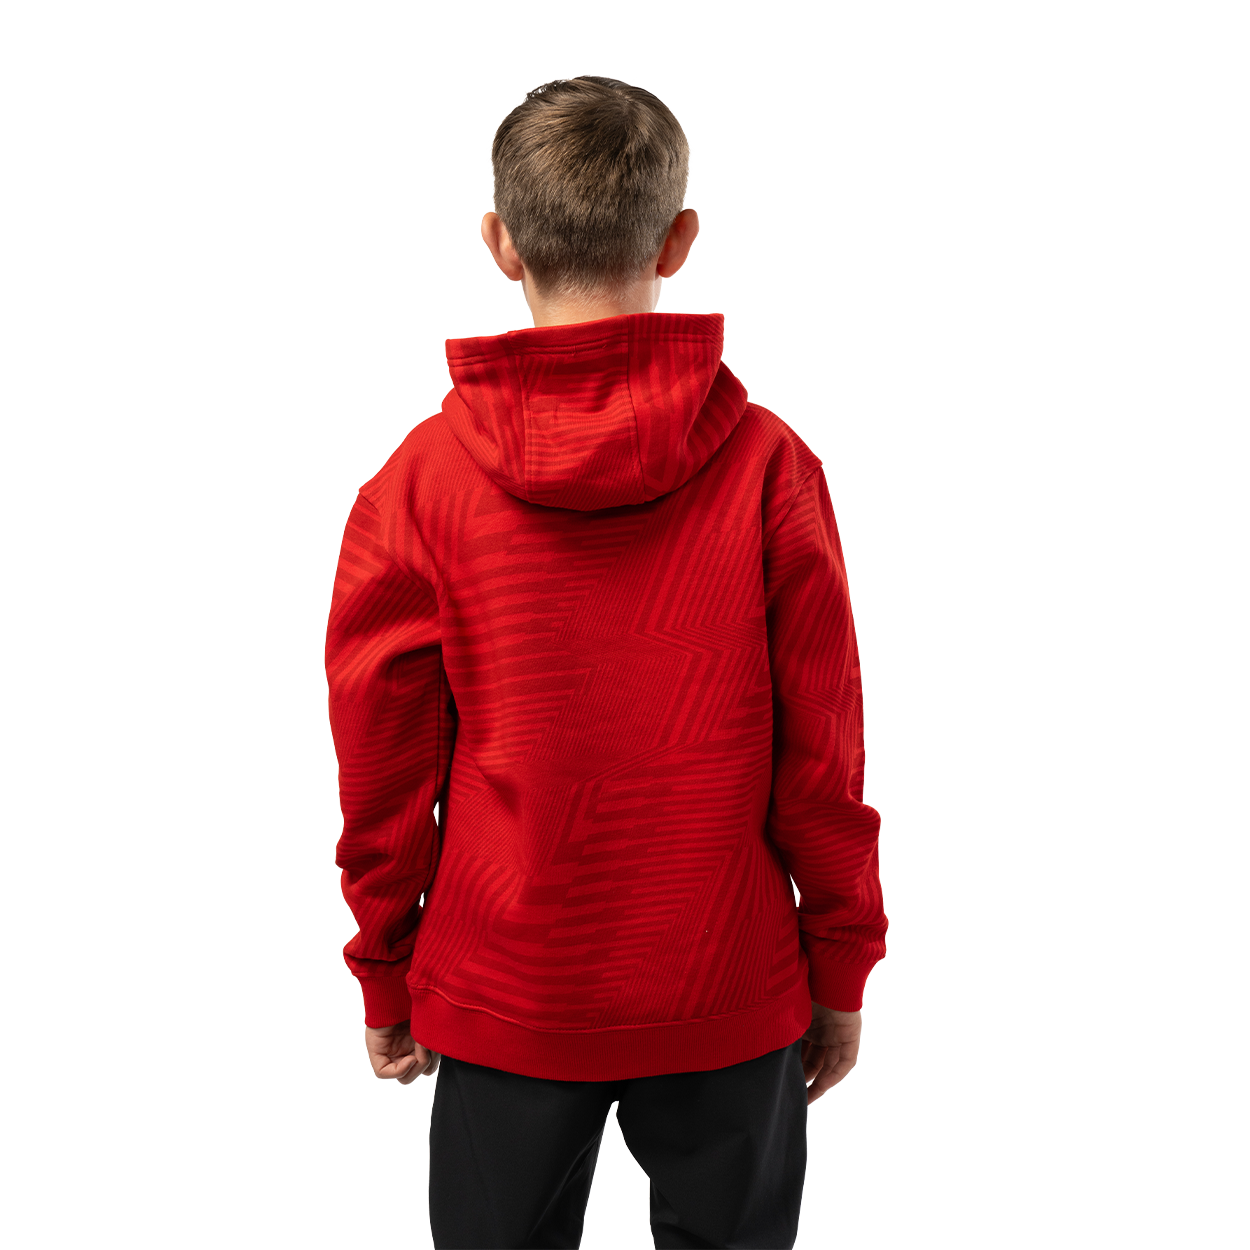 BAUER GRAPHIC STRIPE HOODIE YOUTH